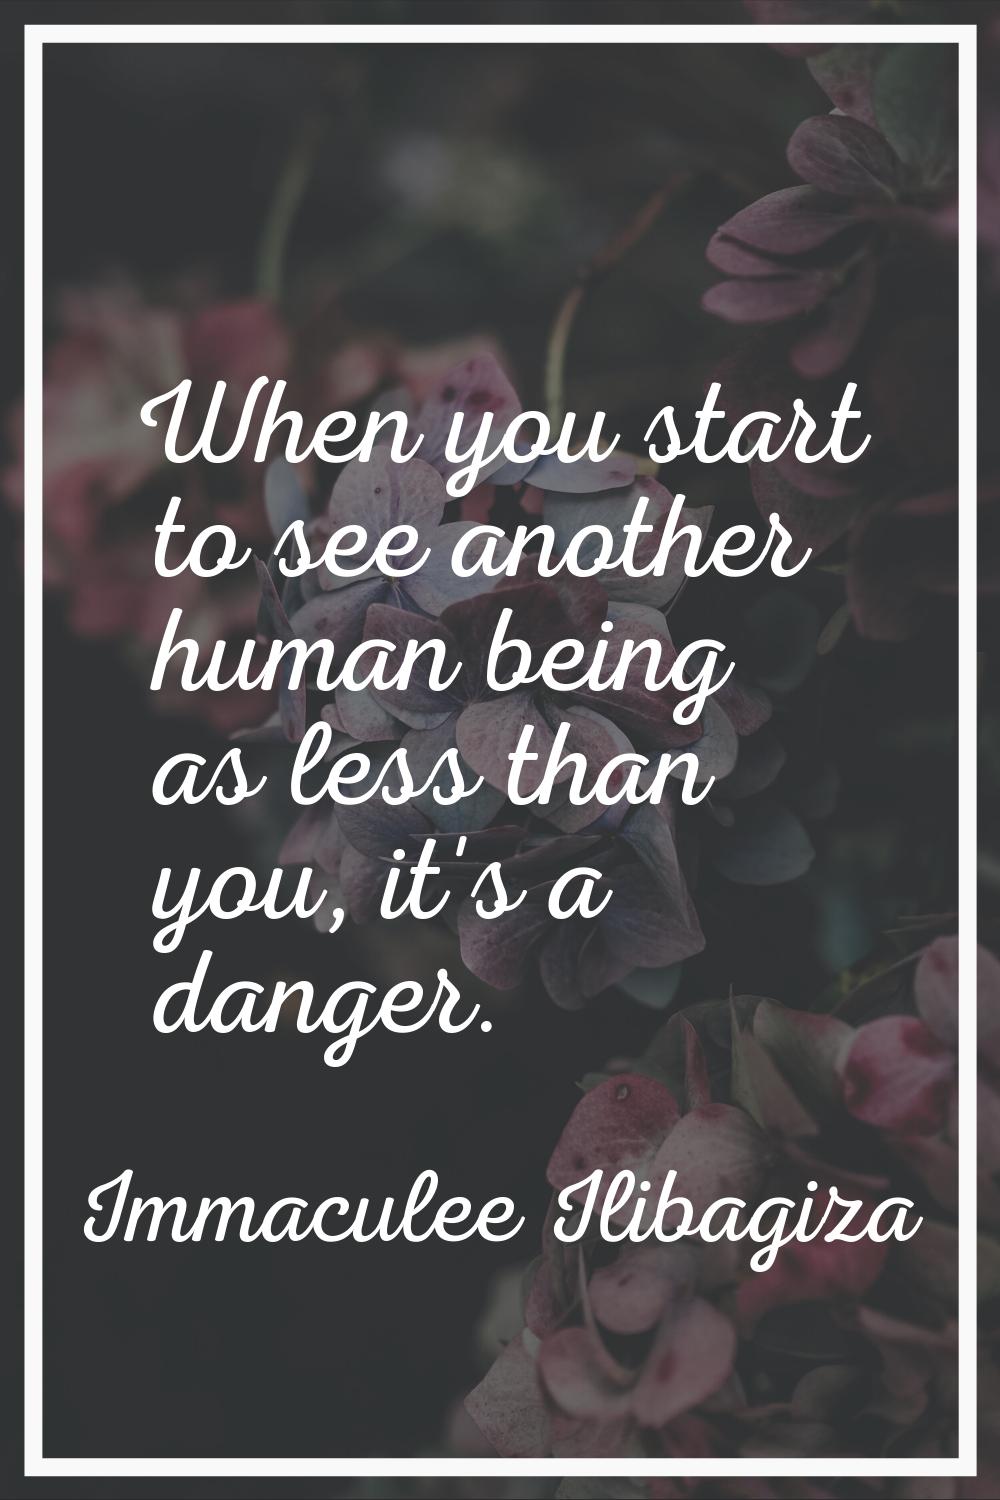 When you start to see another human being as less than you, it's a danger.